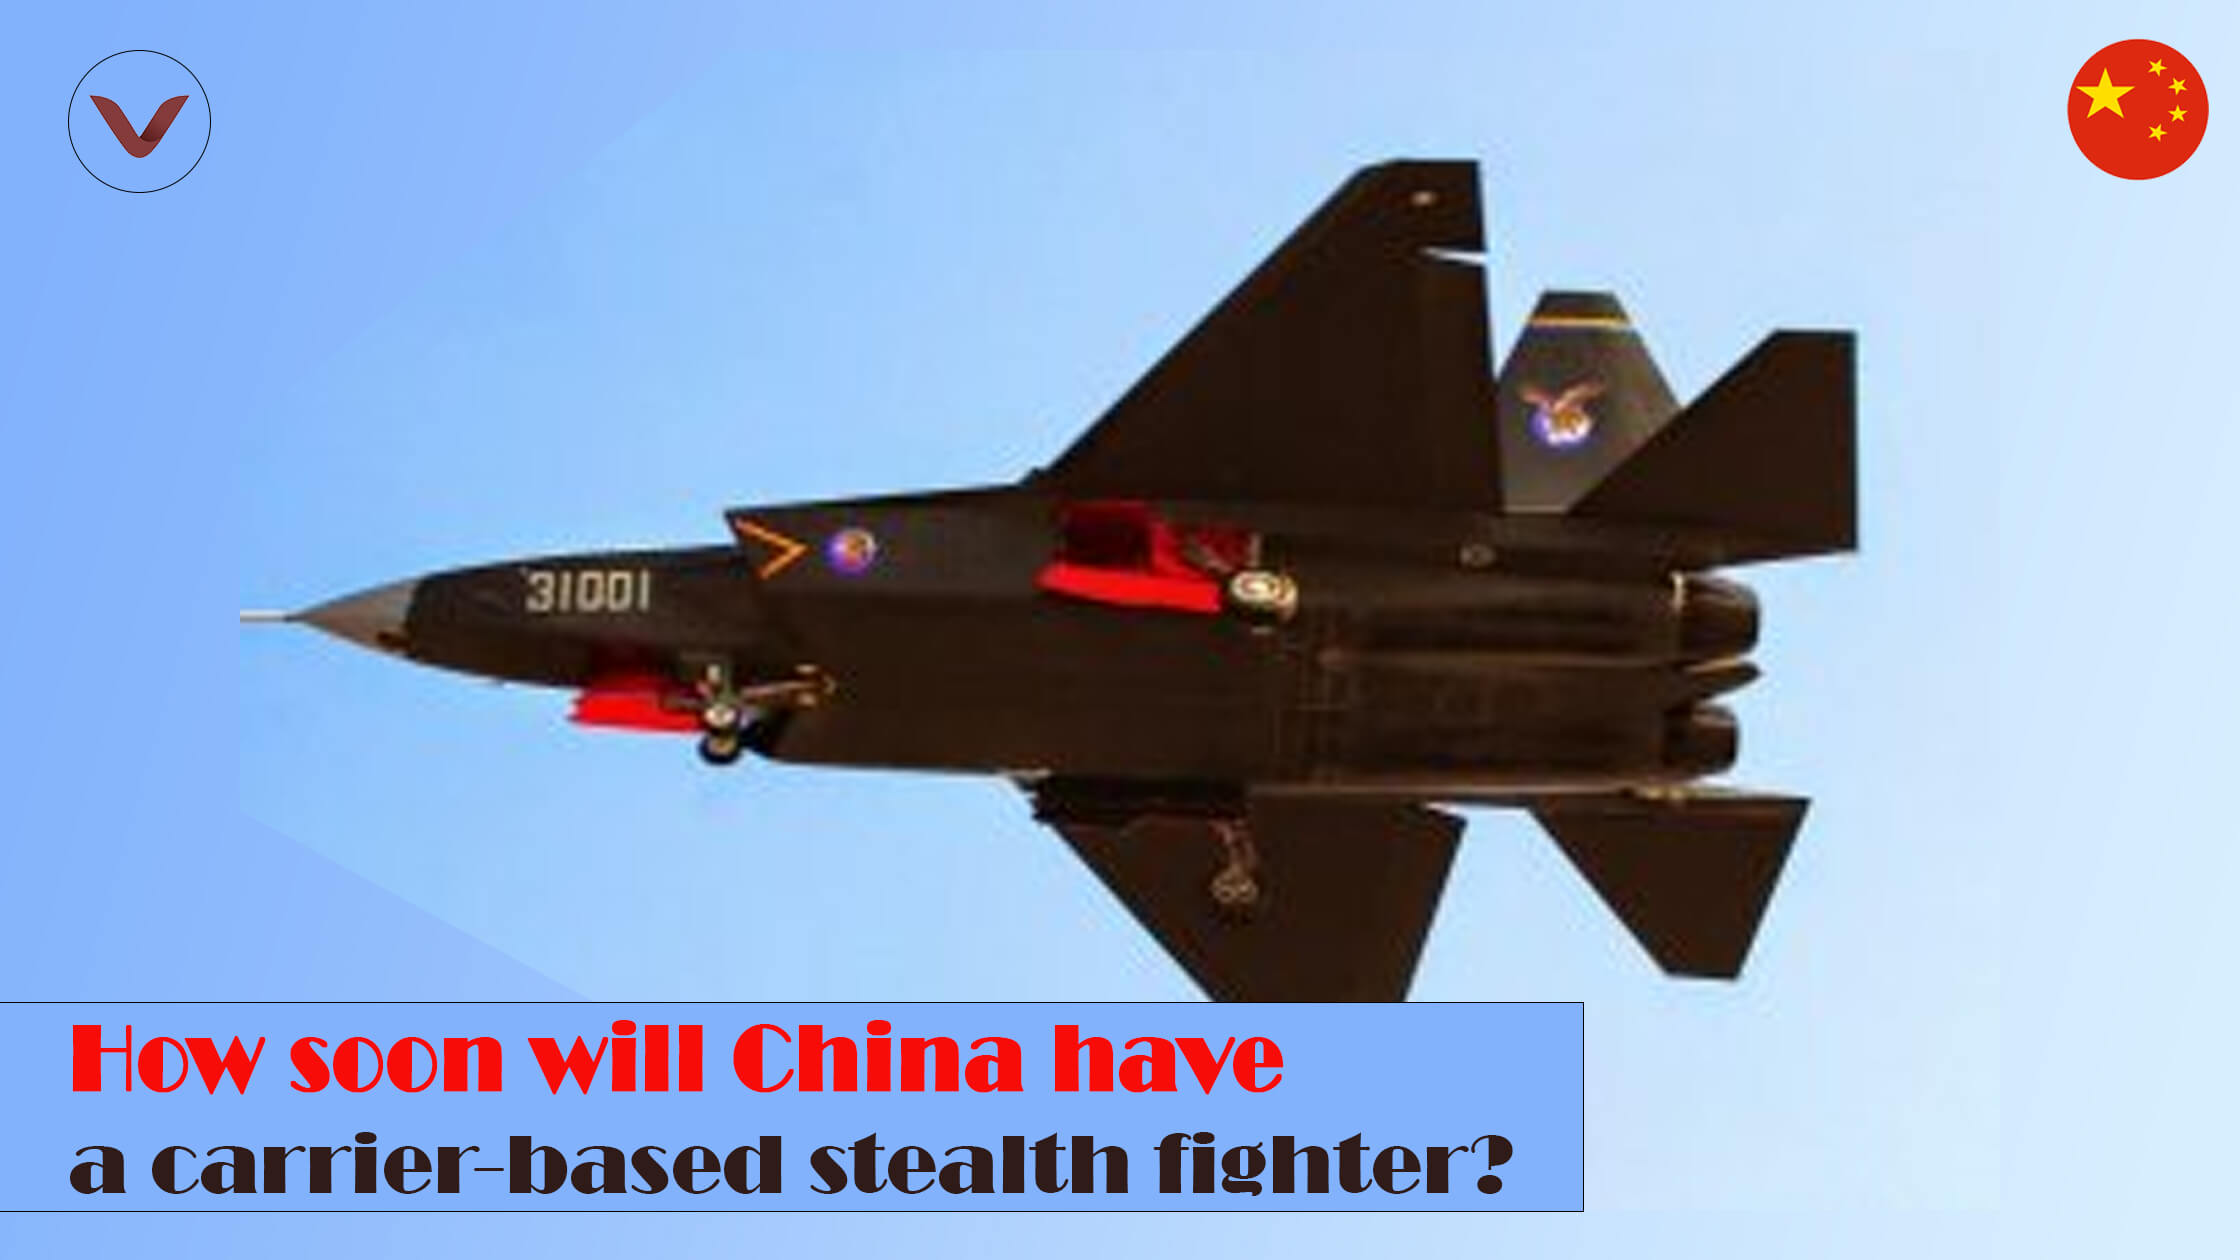 How soon will China have a carrier-based stealth fighter?